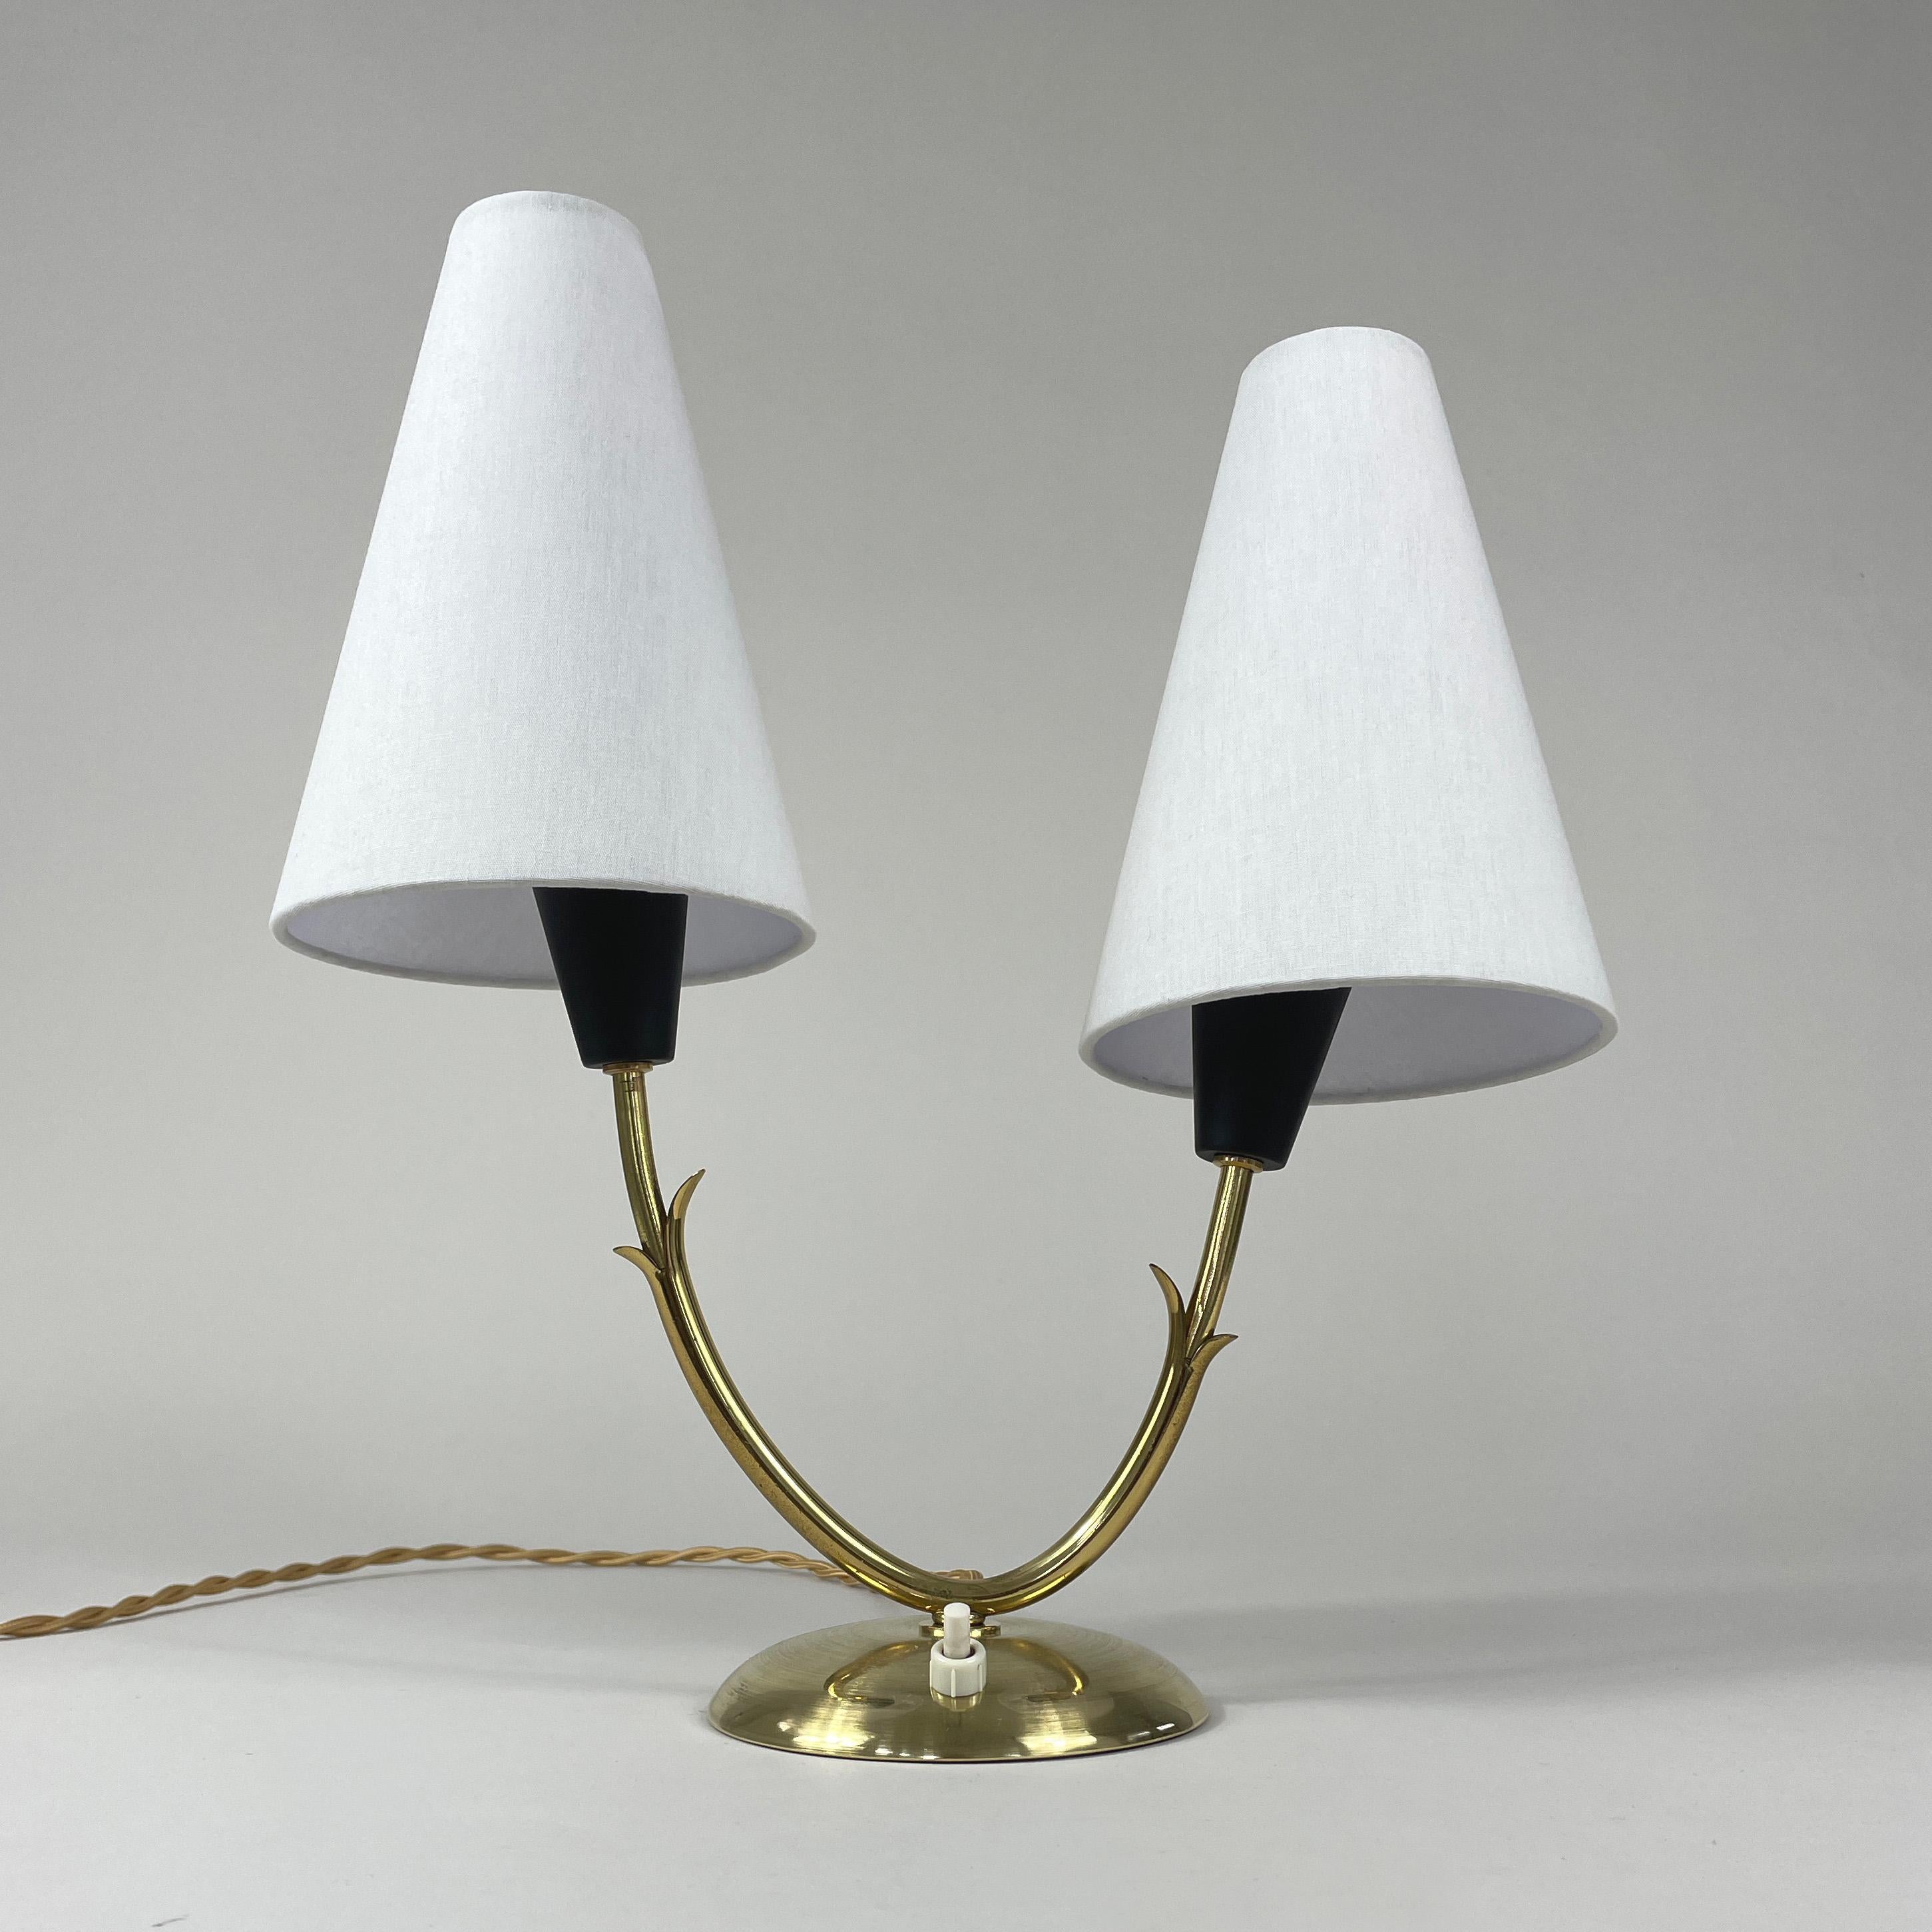 Double Arm Brass Table Lamp, Sweden 1950s For Sale 6